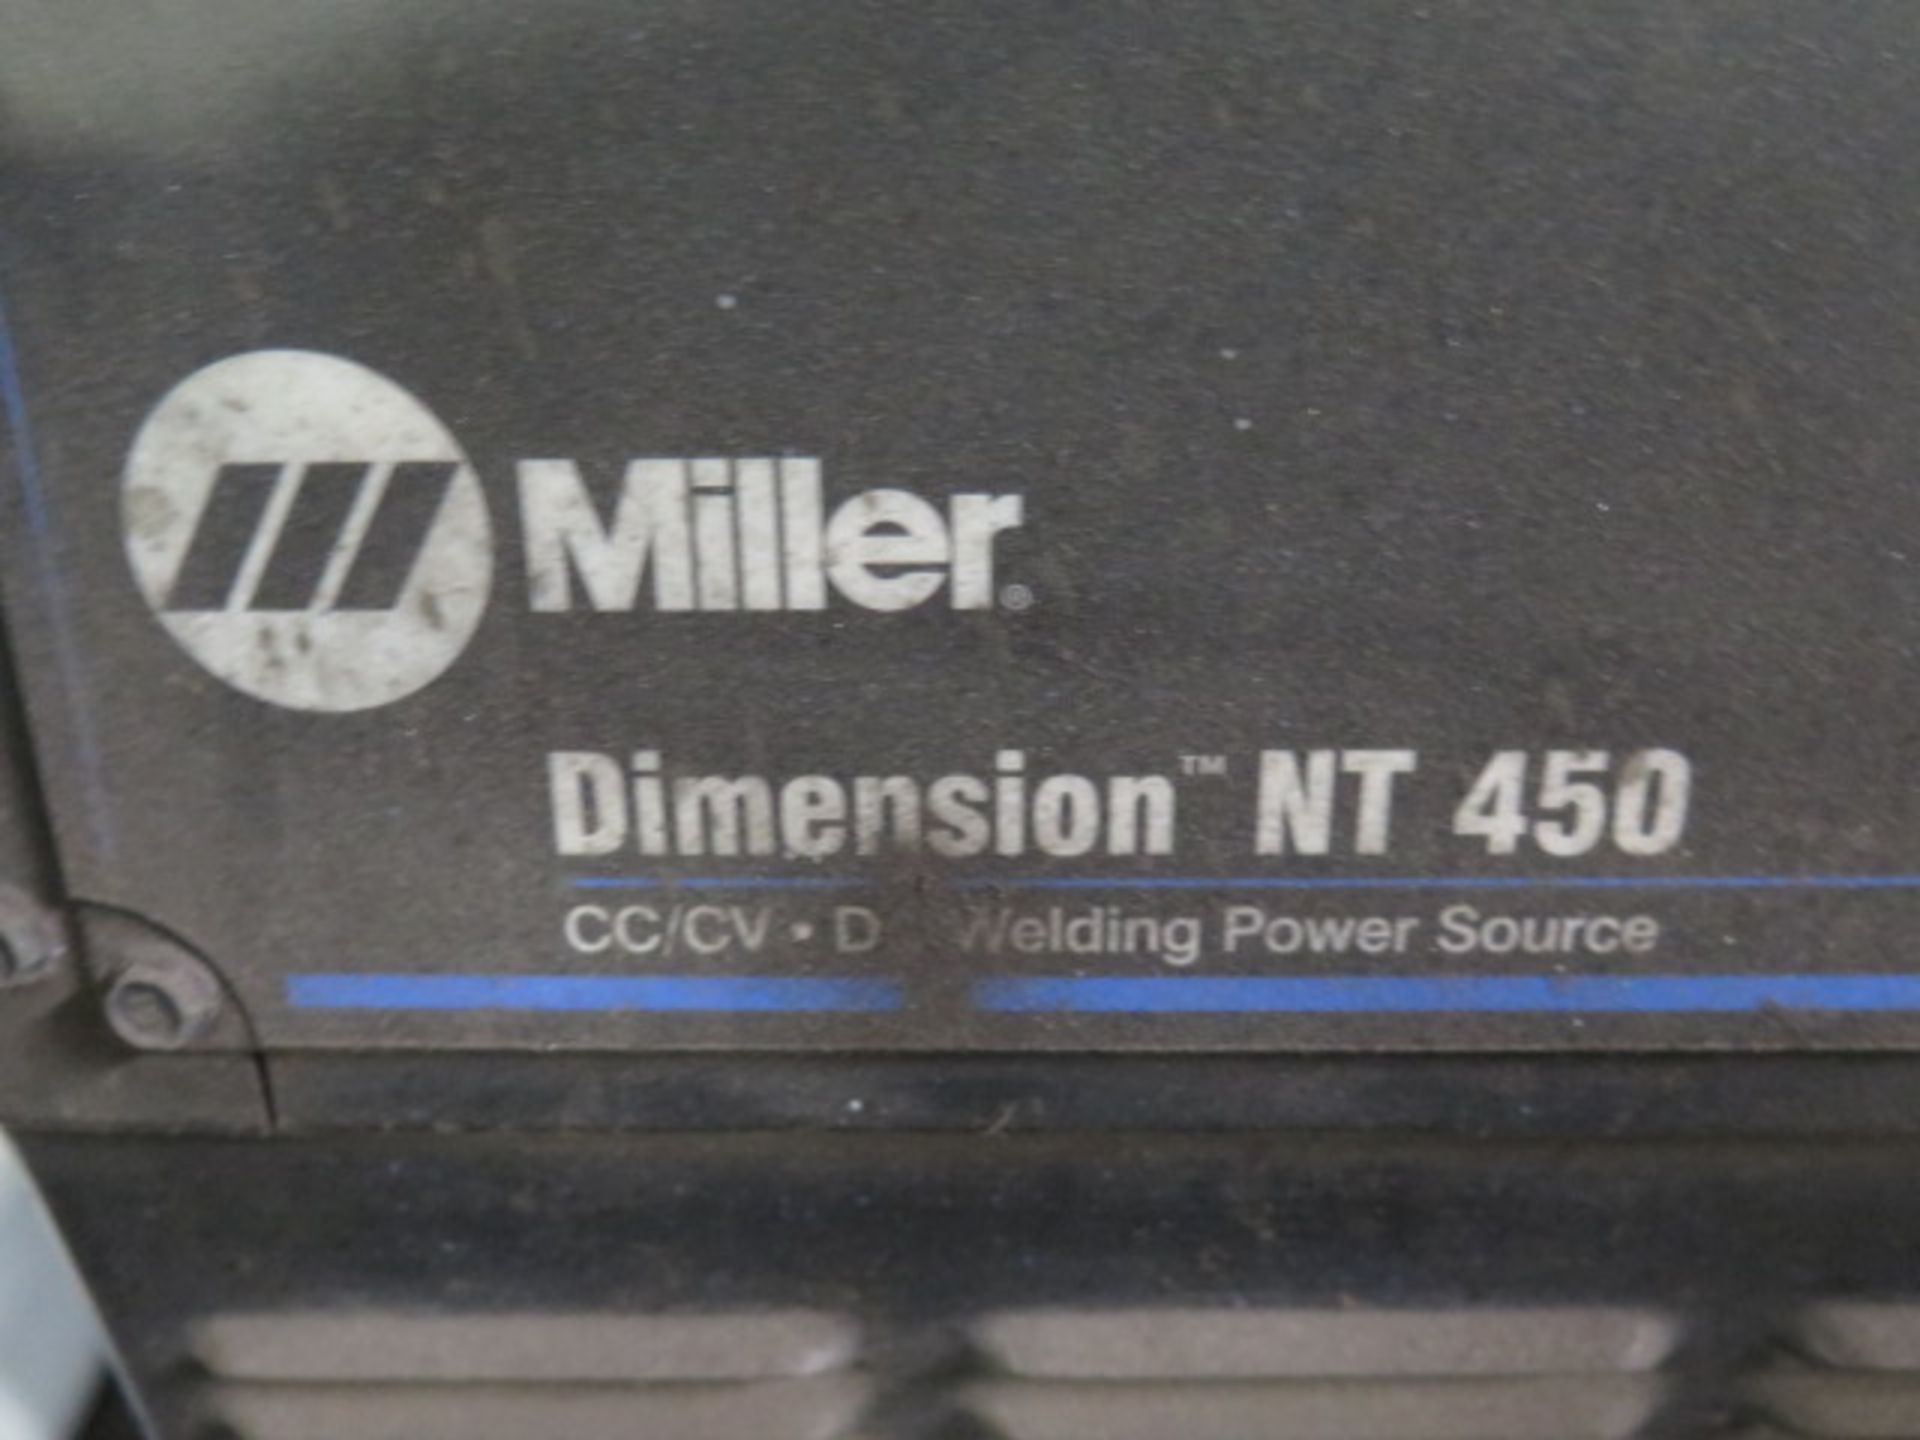 Miller Dimension NT450 CC/CV-DC Arc Welding Power Source w/ Miller 70 Series SOLD AS IS - Image 10 of 10